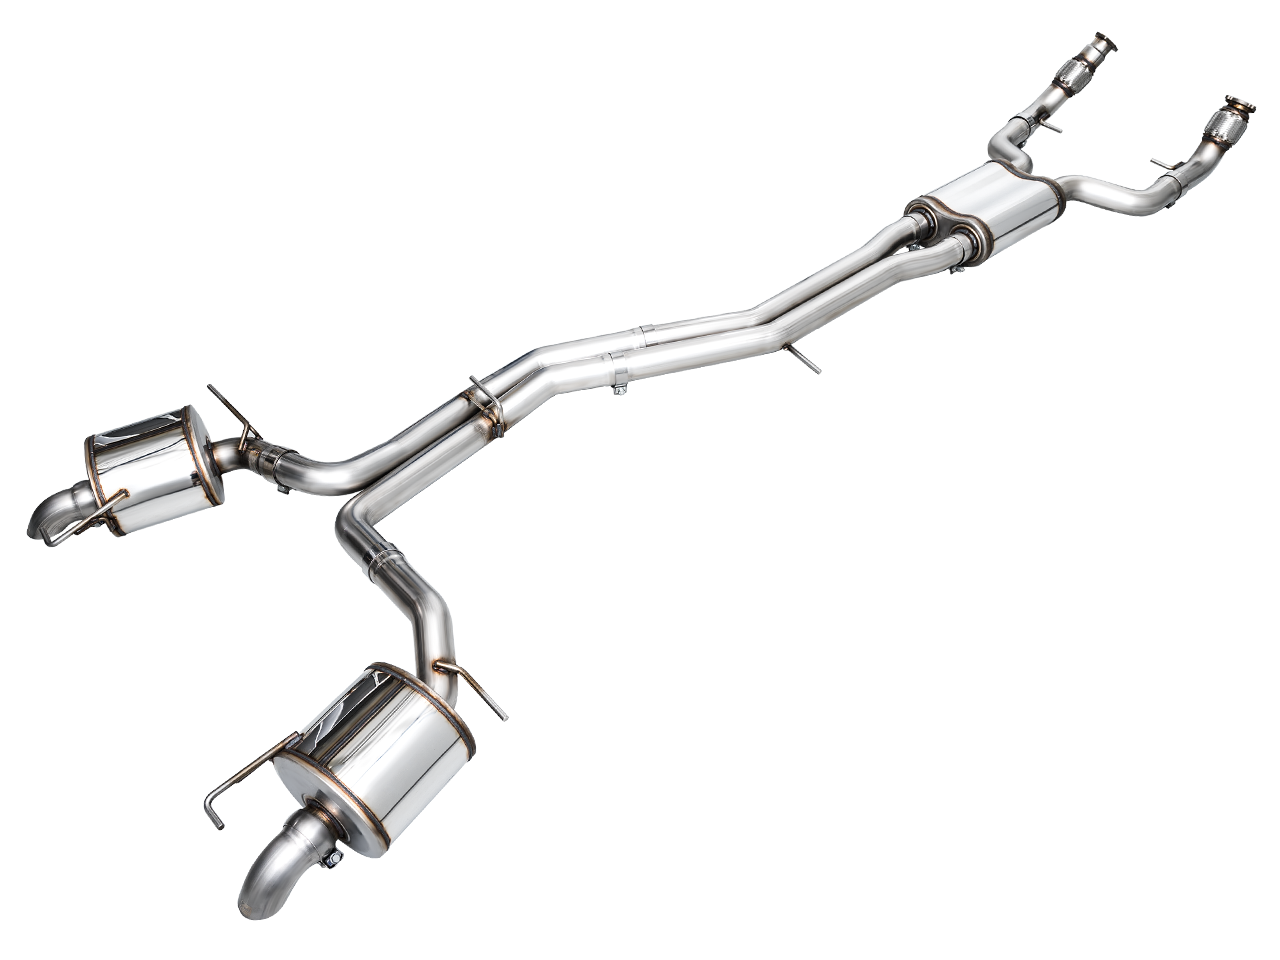 AWE Touring Edition Exhaust for Audi C8 A6/A7 - Turndowns (SKU: 3015-31003)